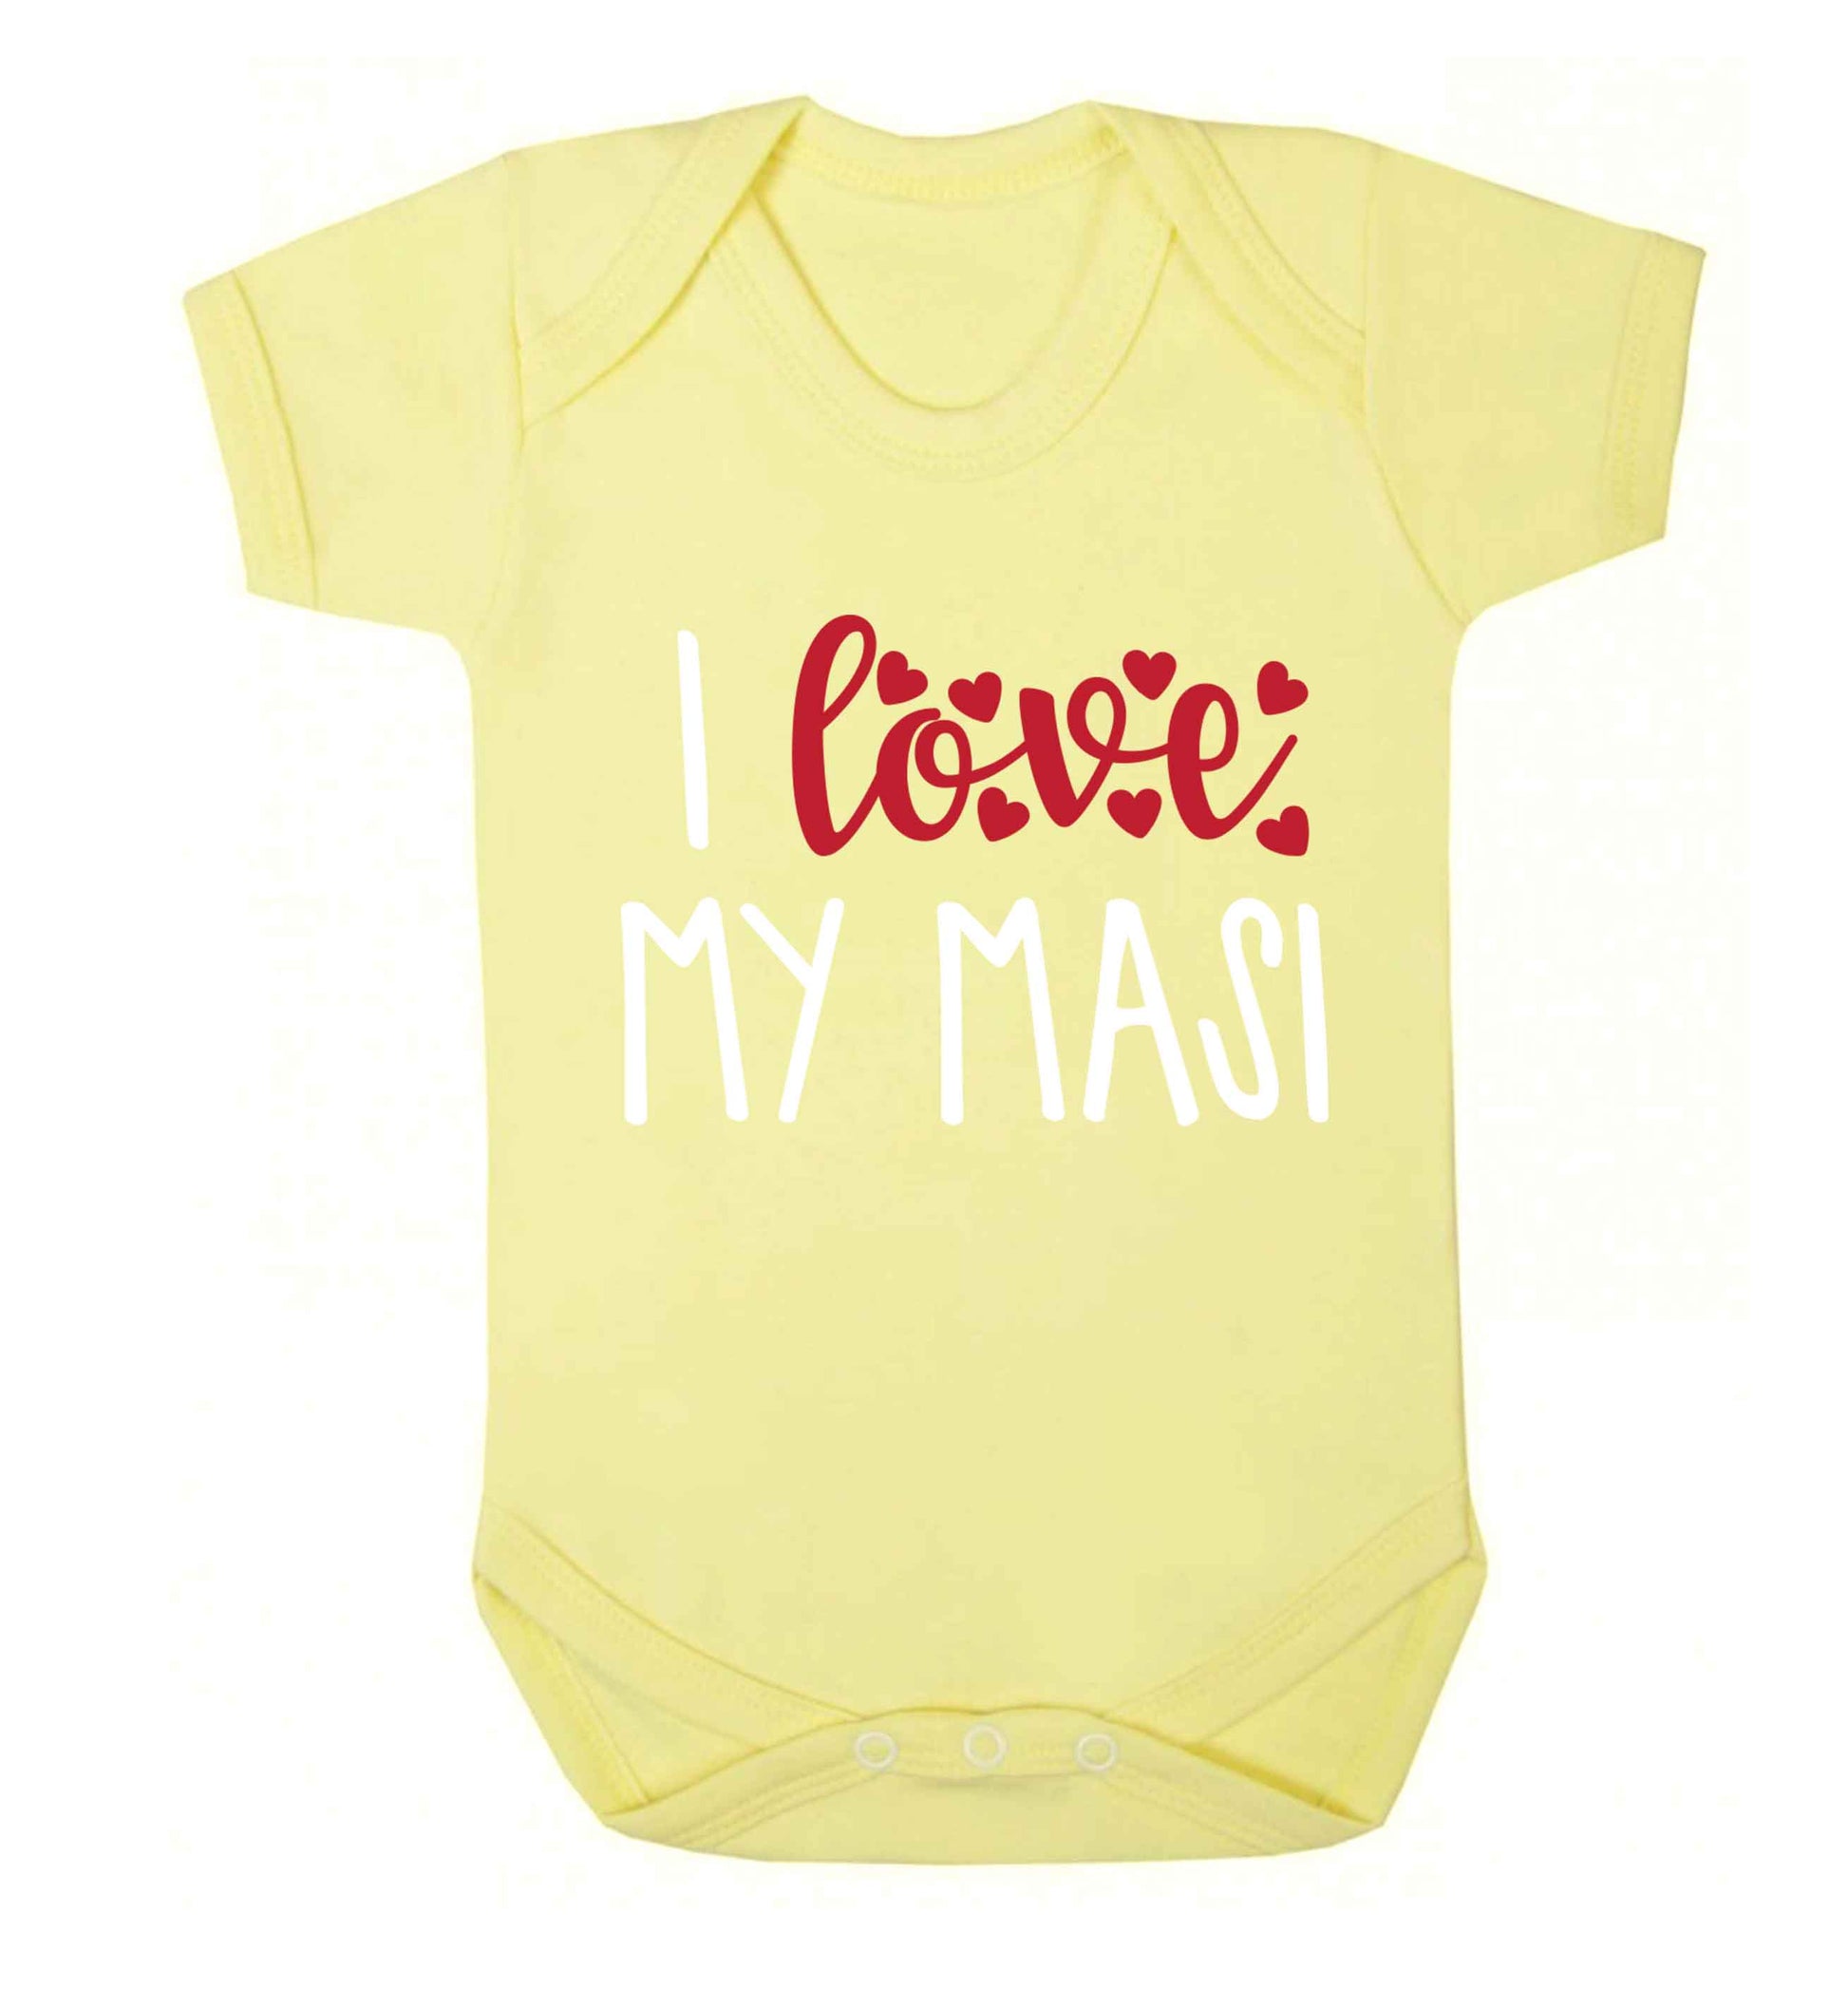 I love my masi Baby Vest pale yellow 18-24 months